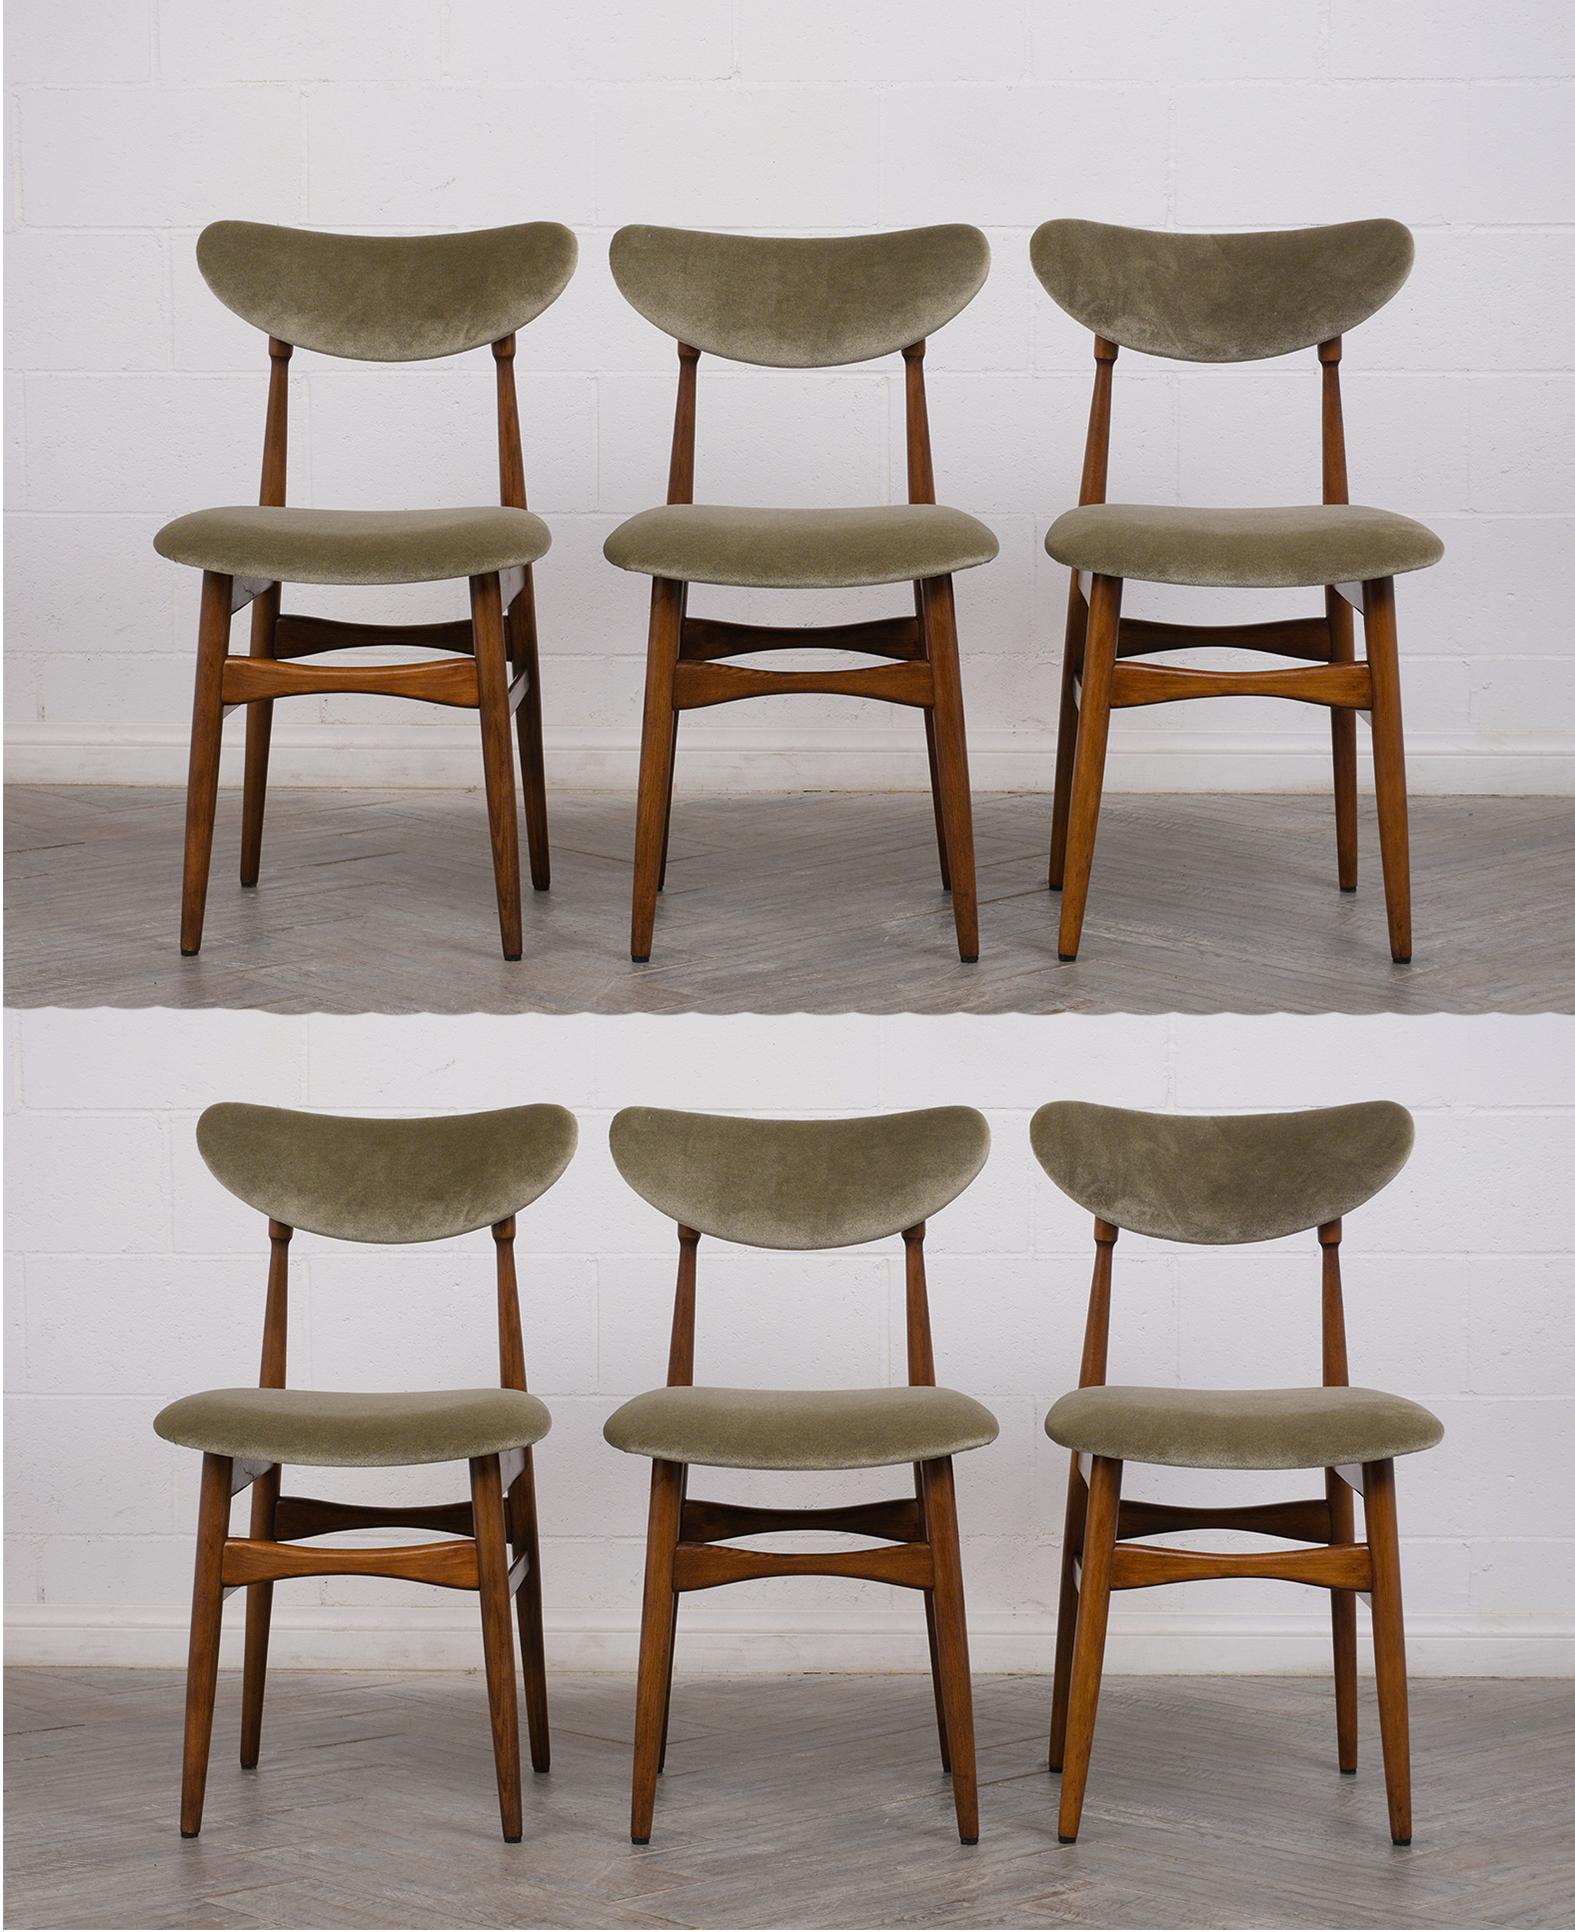 This set of twelve Mid-Century Modern style dining chairs are newly restored and in great condition. This set features walnut wood frames that are a dark walnut color with lacquer finish. The frames have a simple sleek design and are very sturdy.